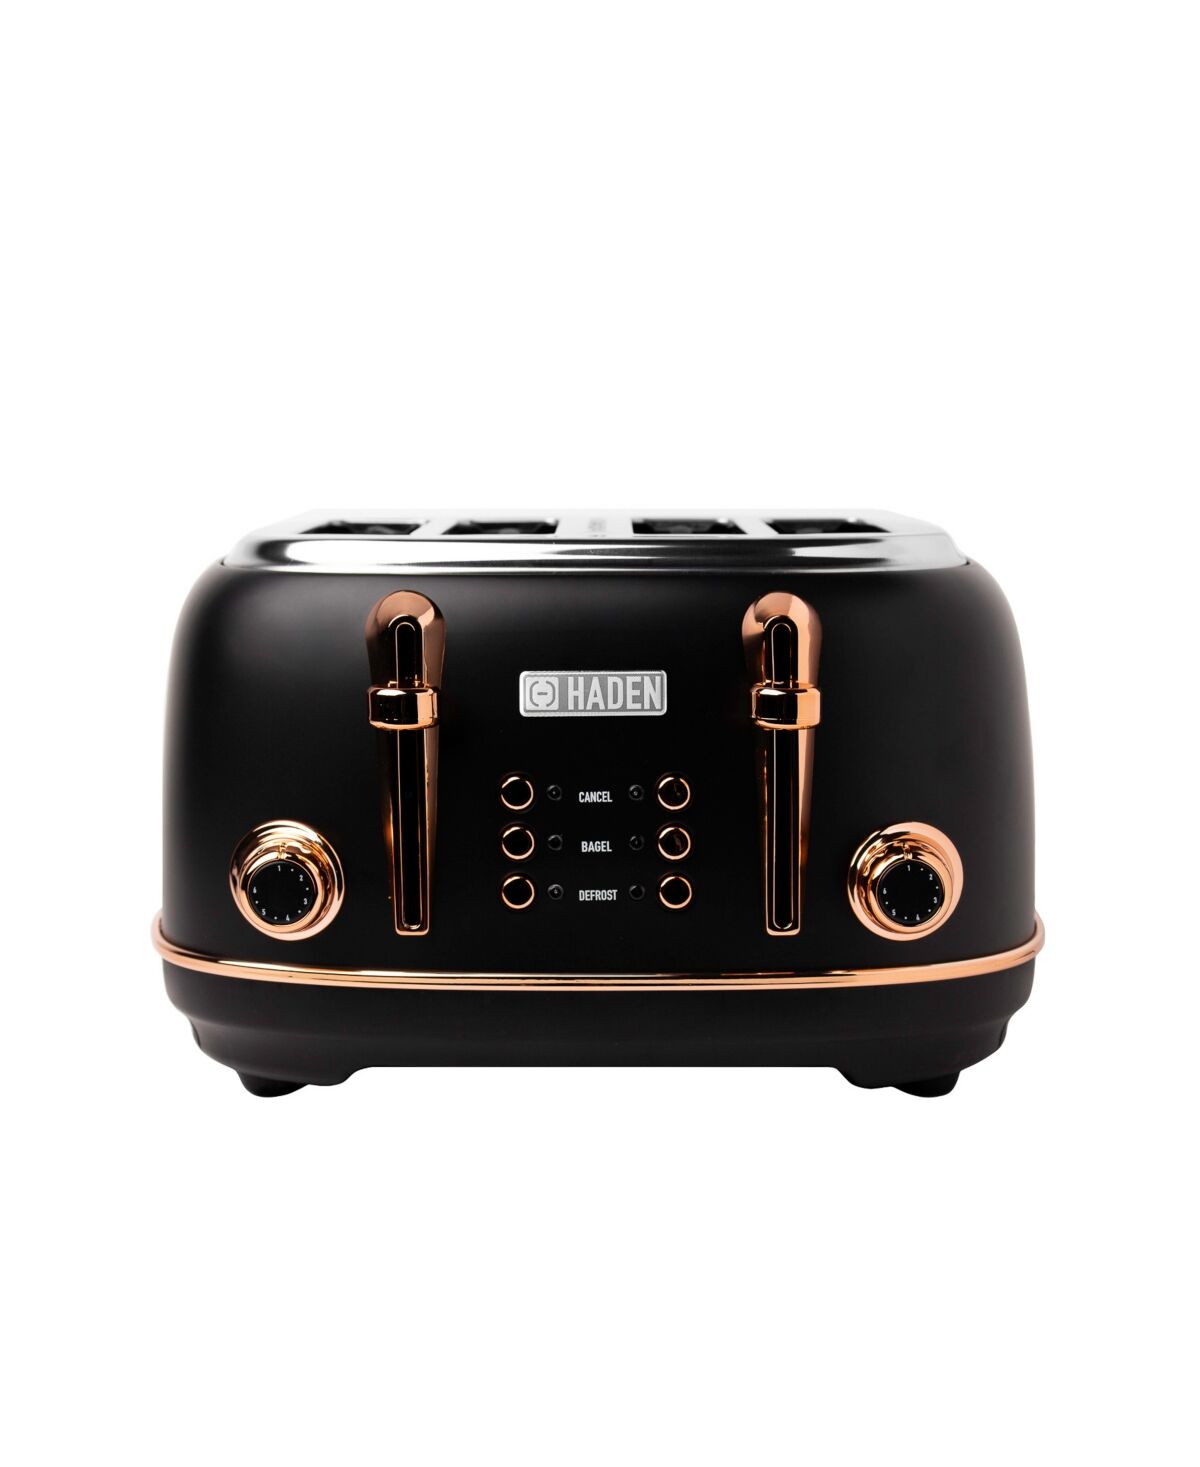 Haden Heritage 4-Slice Toaster with Browning Control, Cancel, Bagel and Defrost Settings - 75042 - Black, Copper